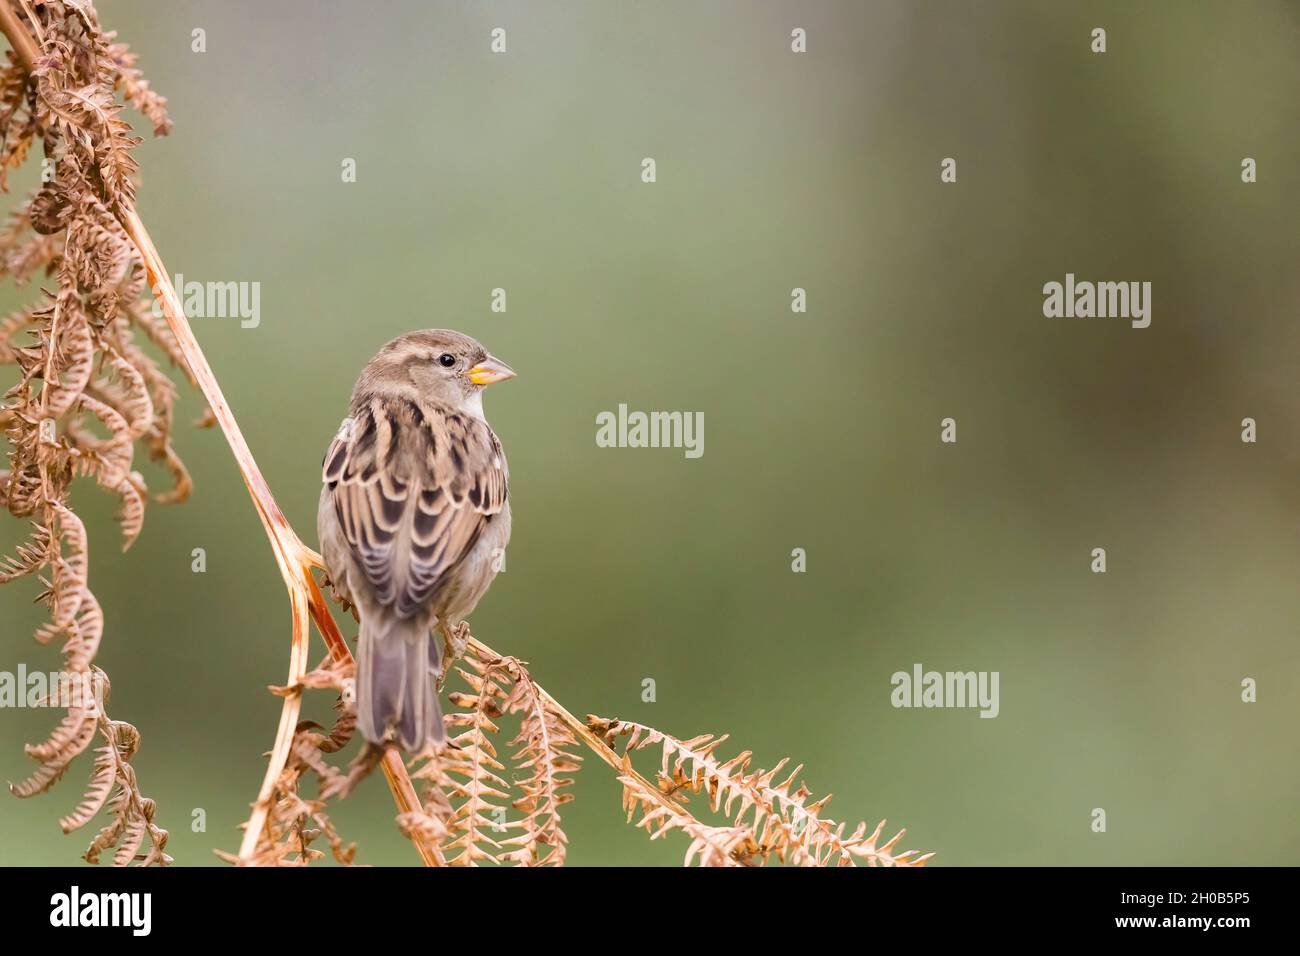 House sparrows (Passer domesticus) on a fern, Alsace, France Stock Photo